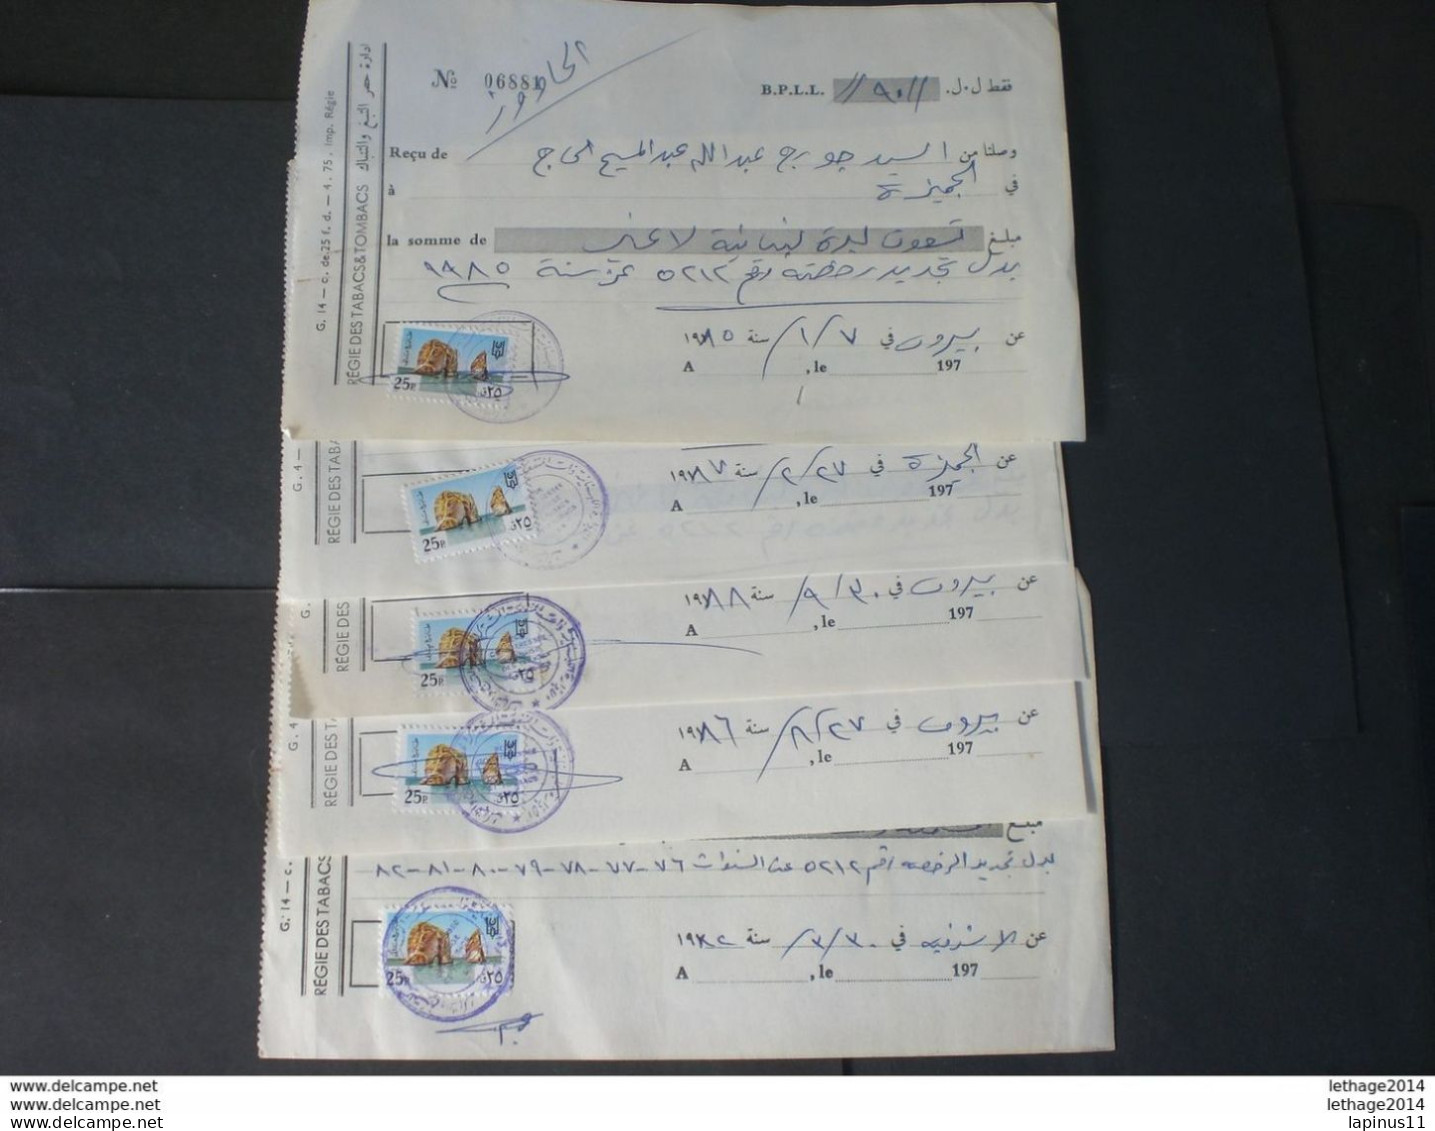 LEBANON لبنان GRAND LIBAN STAMPS TAXE TAX FISCAL REVENUE ORIGINAL NUMBER 88 DOCUMENT + 7 PHOTO - Líbano